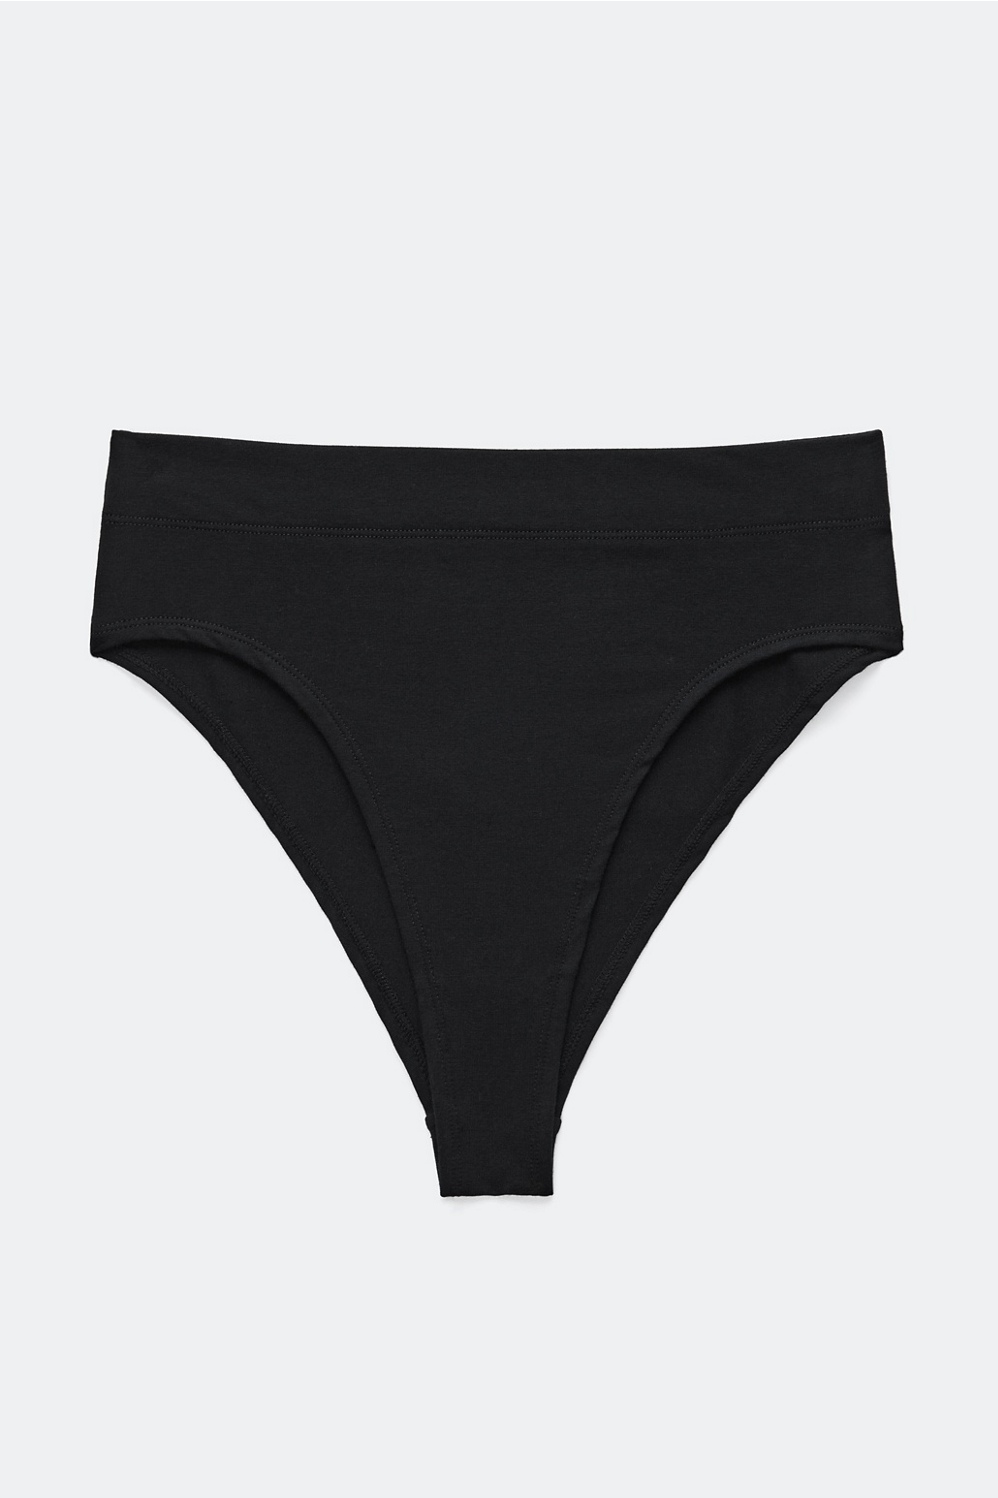 High waist stretchy panties🥰🥰 Price: N5,200 for 2pcs Size: M to 2XL  📌Please note that colors of our panties are randomly selec